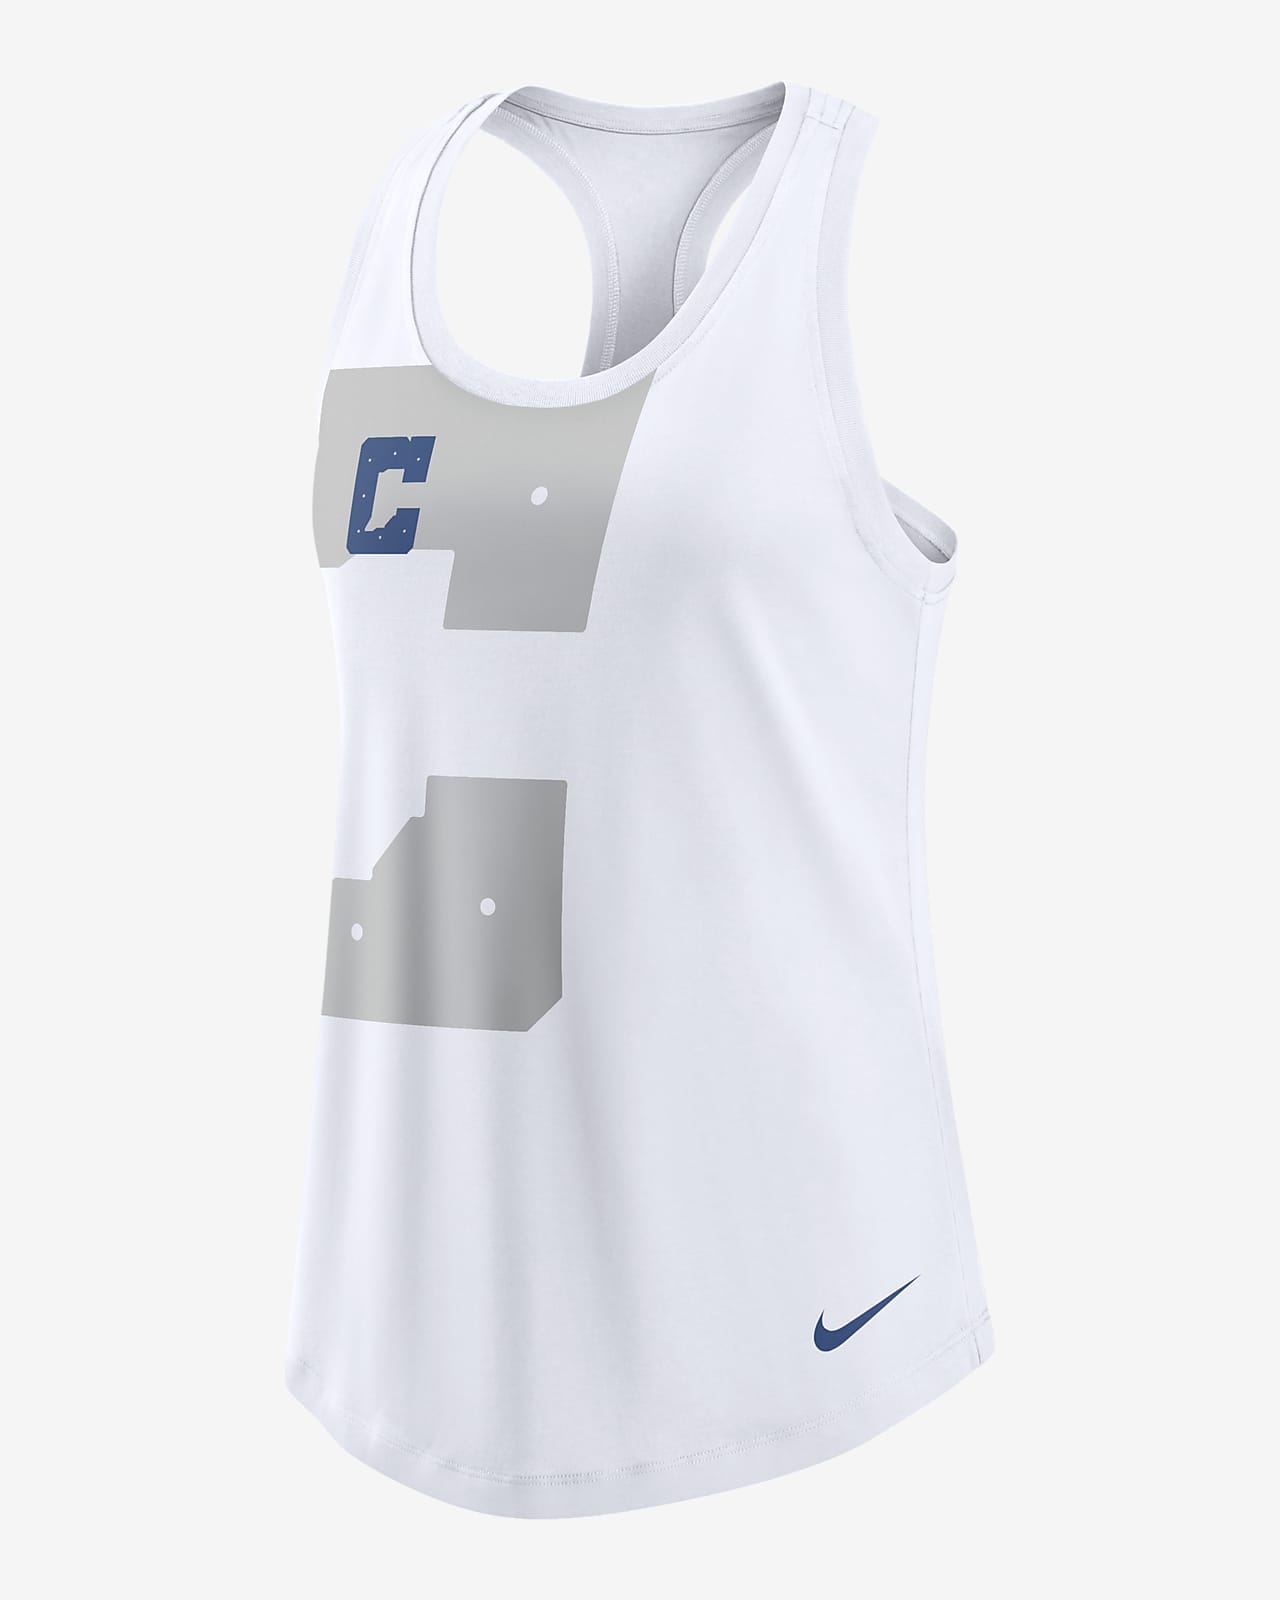 Nike Team (NFL Indianapolis Colts) Women's Racerback Tank Top